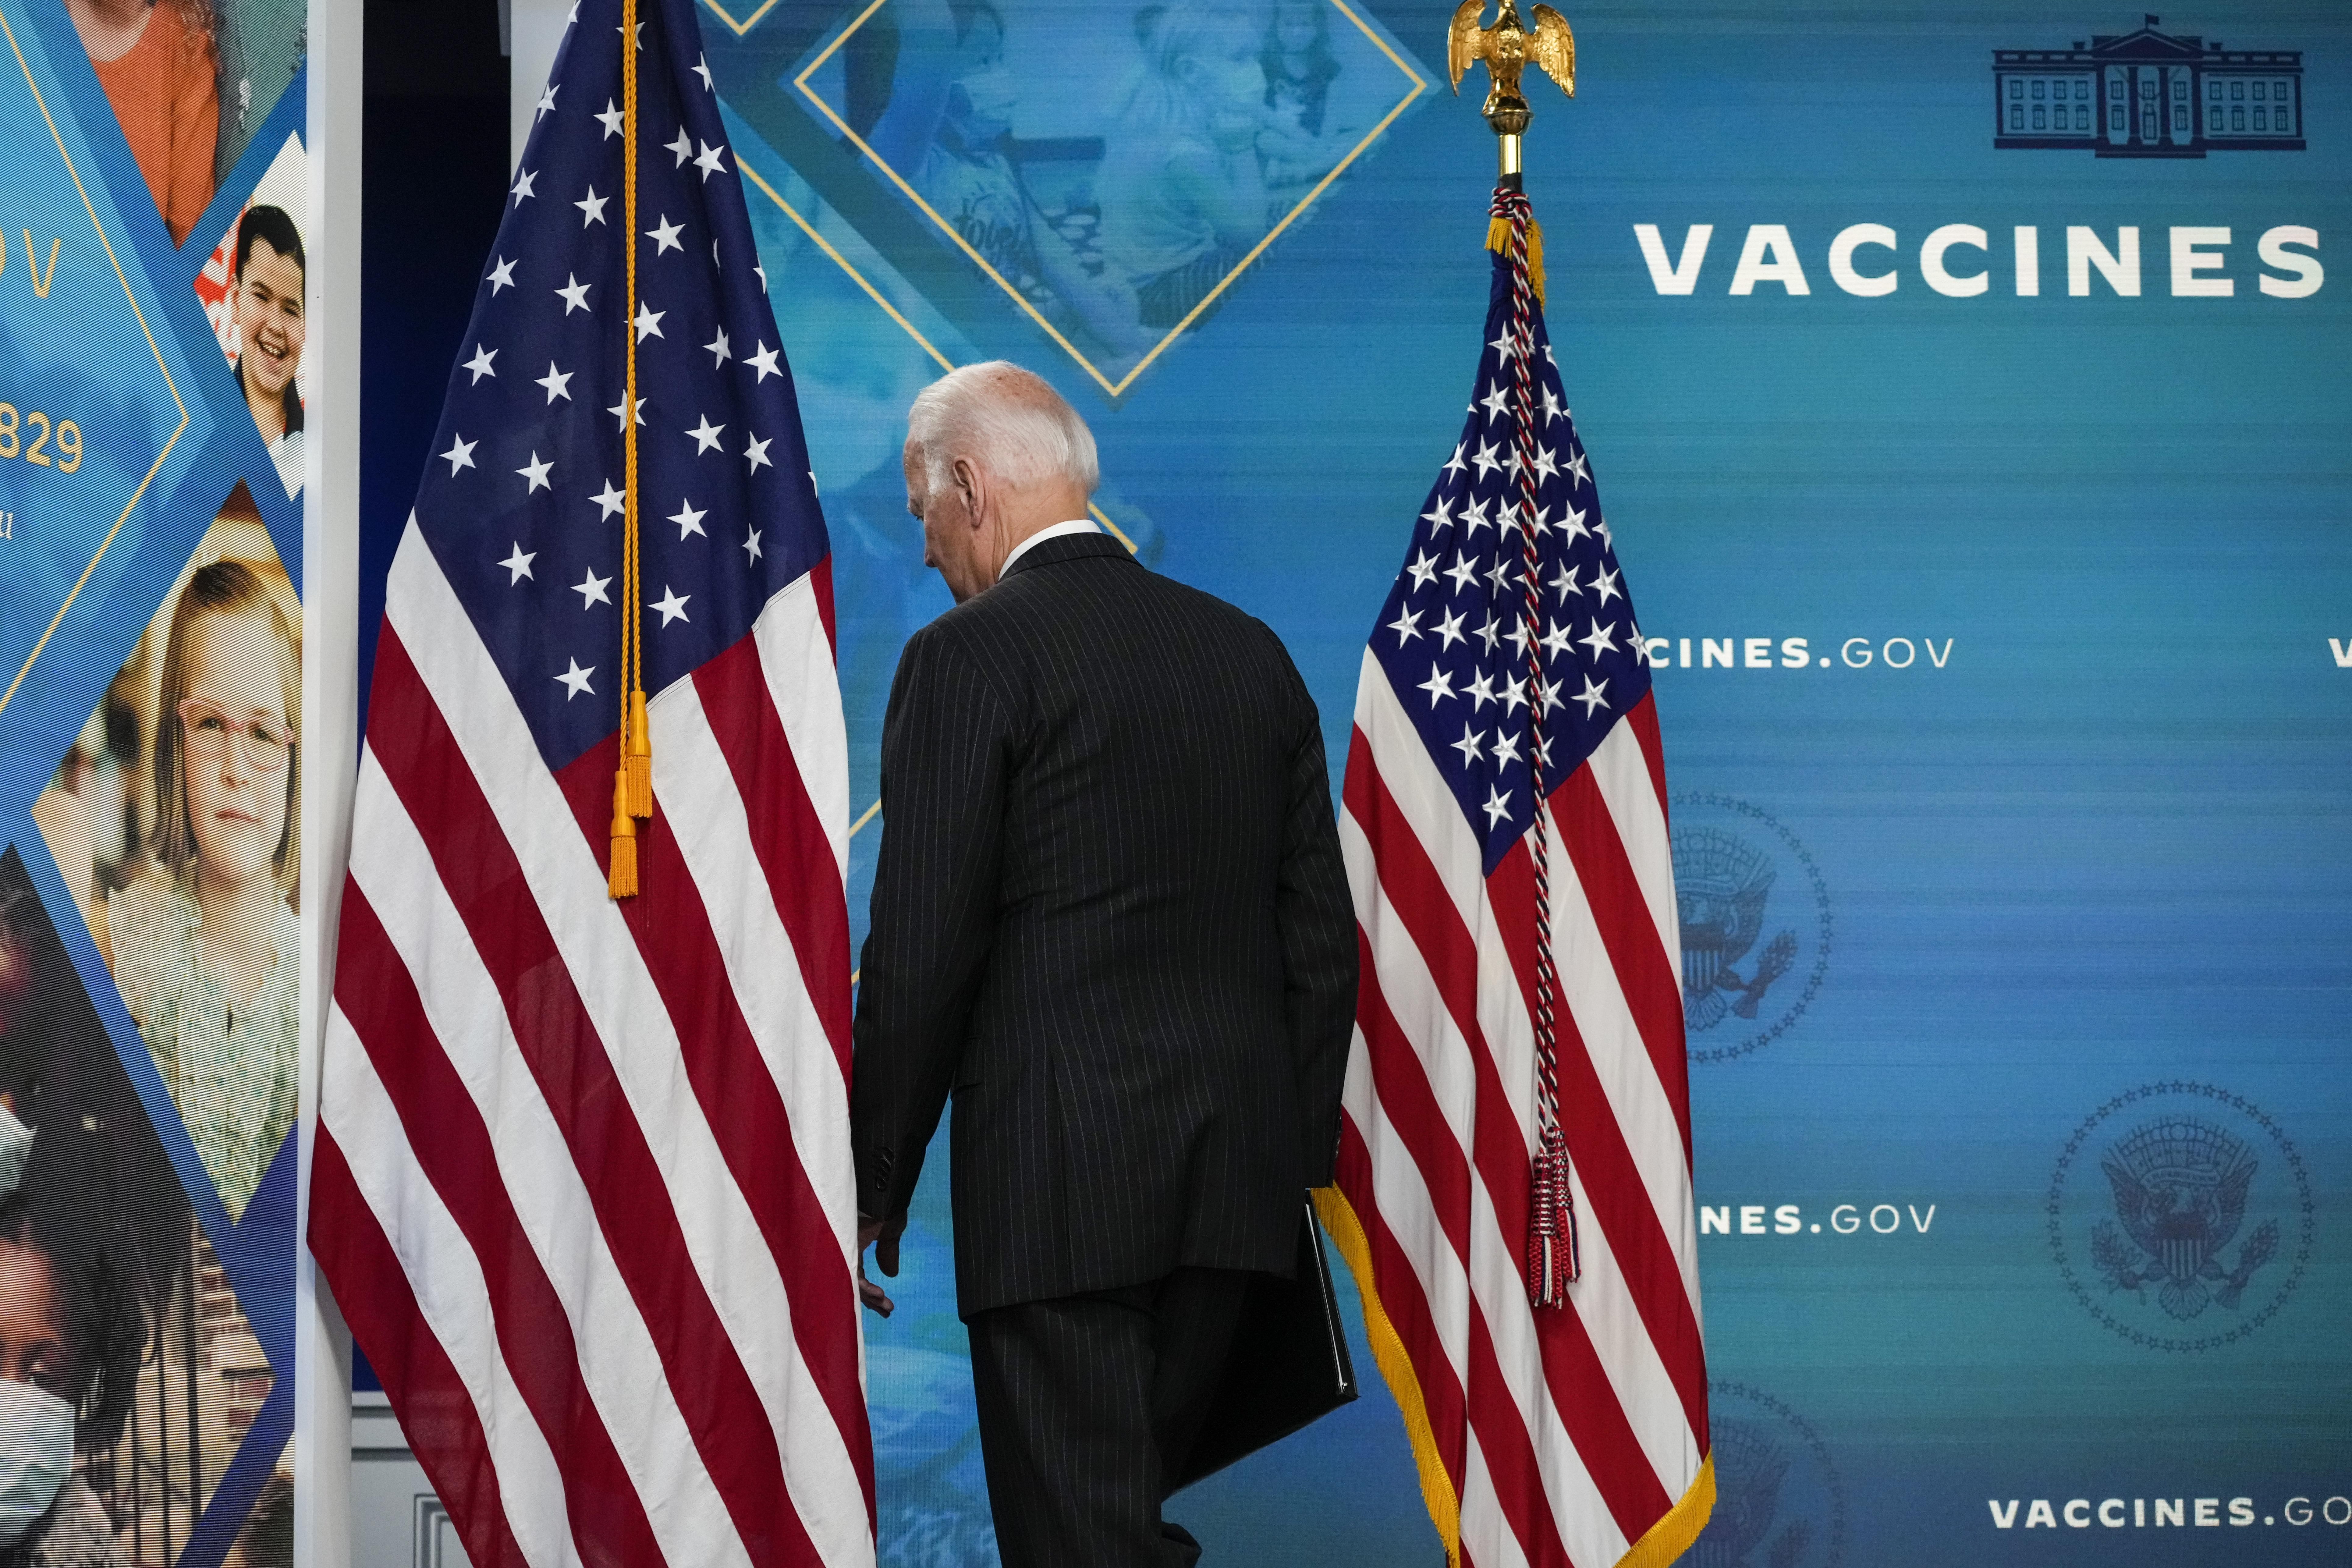 U.S. President Joe Biden departs after speaking about the authorization of Covid-19 vaccines for children ages 5-11 on November 3, 2021 in Washington, D.C.